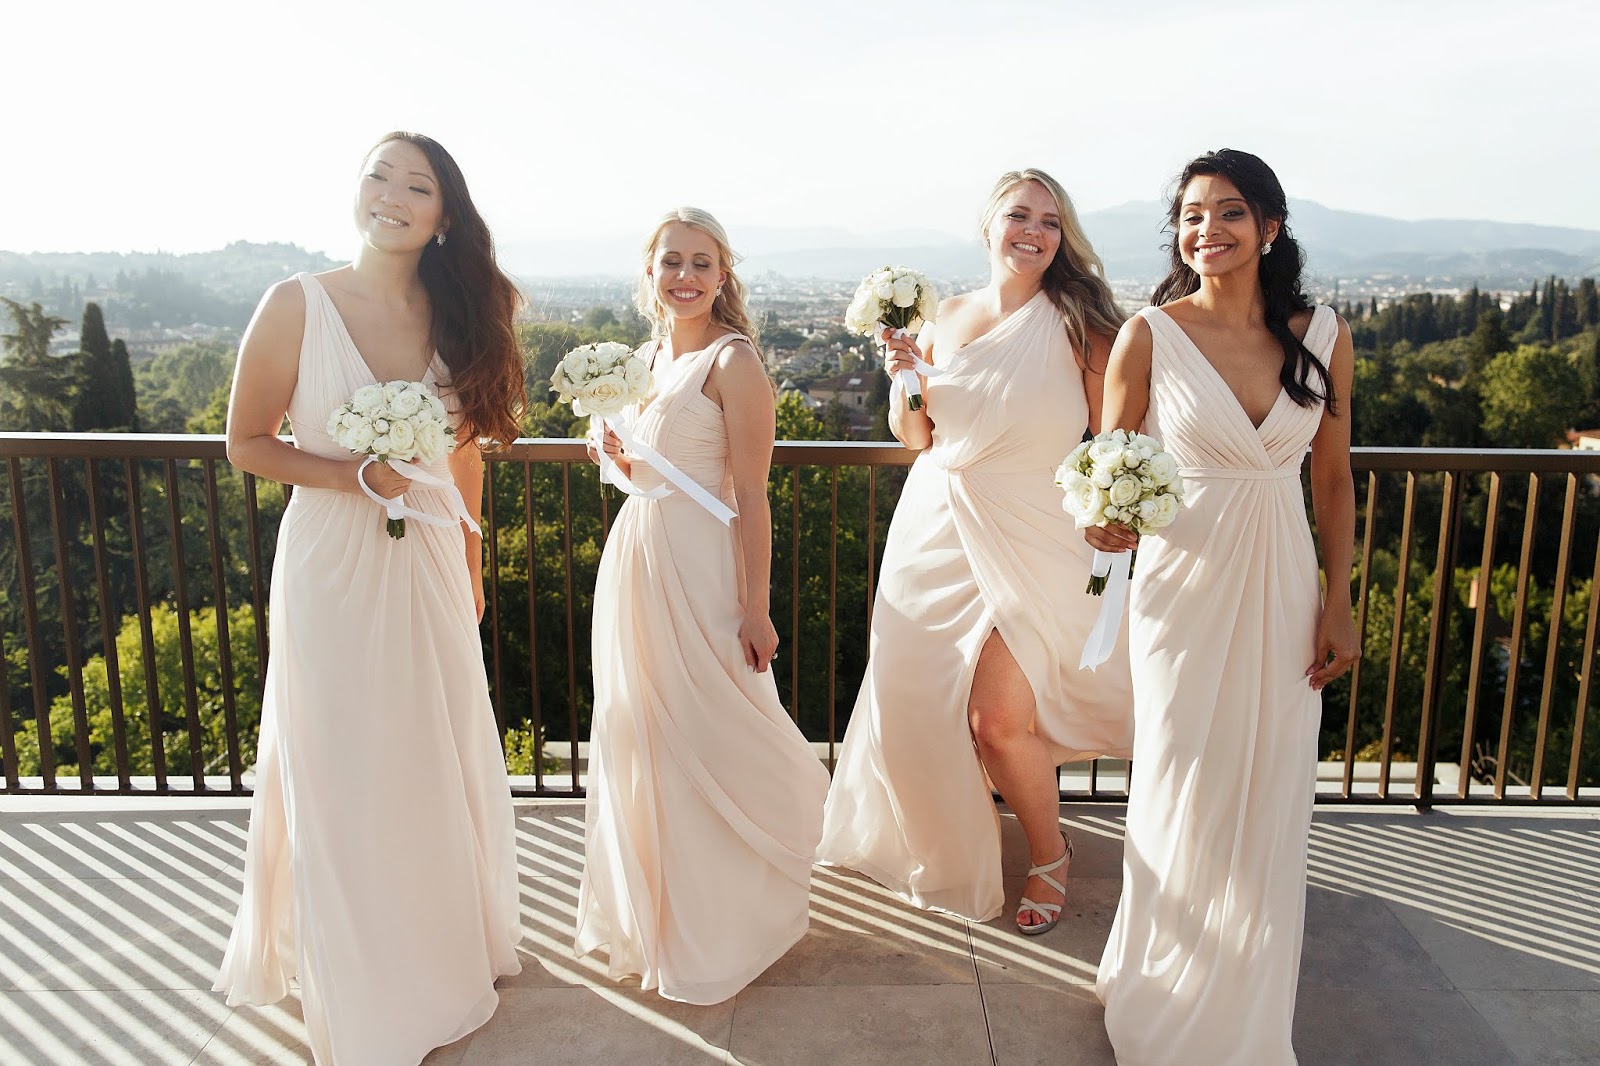 Mix And Match Your Bridesmaid Dresses